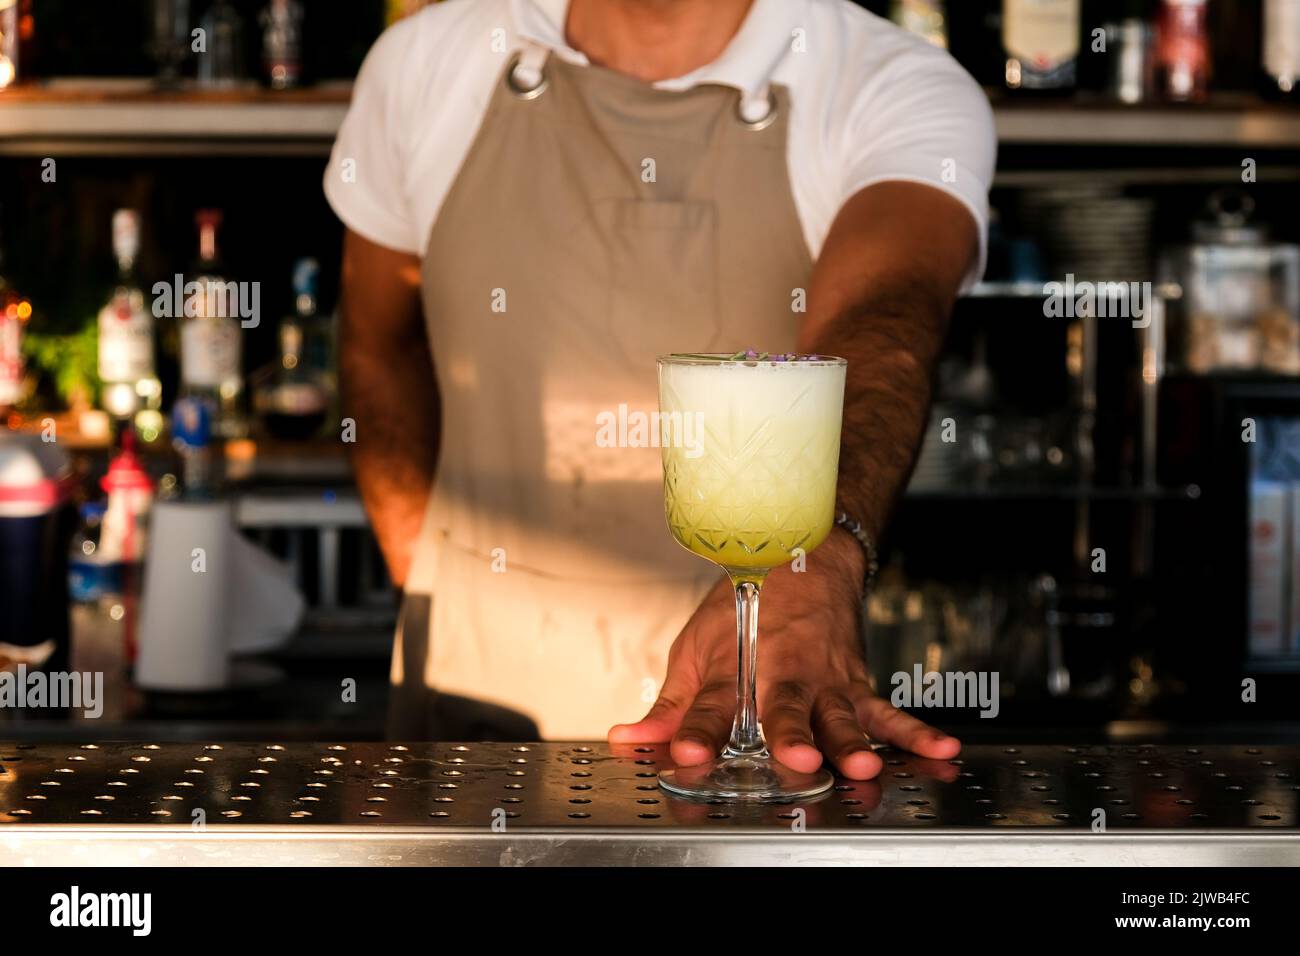 Bartender serving fresh yellow, white summer fruit cocktail at bar counter on sunny day. Selected focus, shallow depth of field. Stock Photo